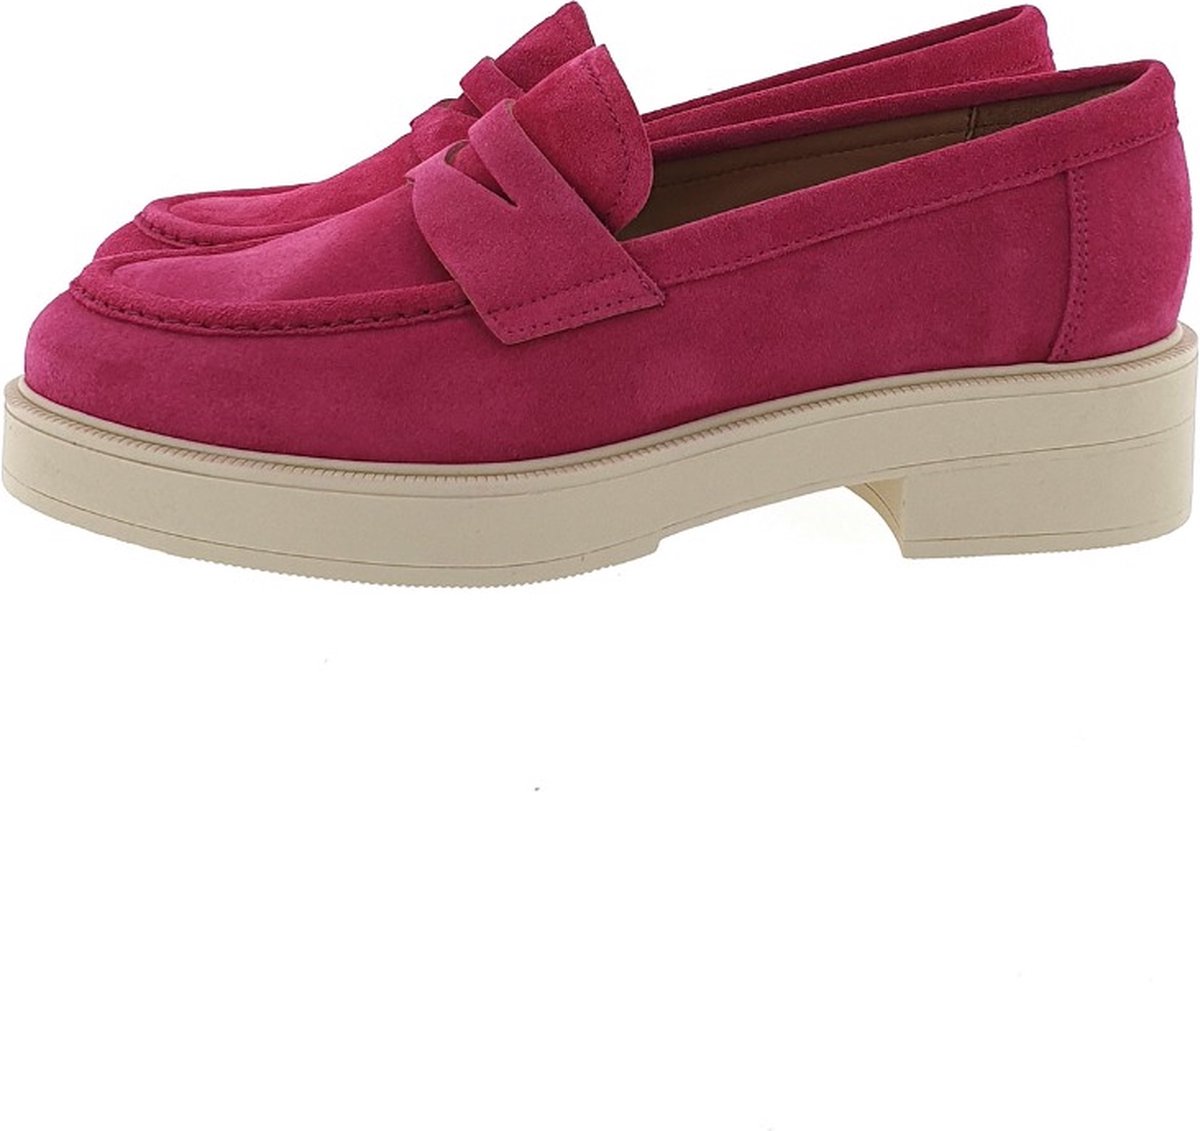 CTWLK London loafer fuxia, 36 / 3